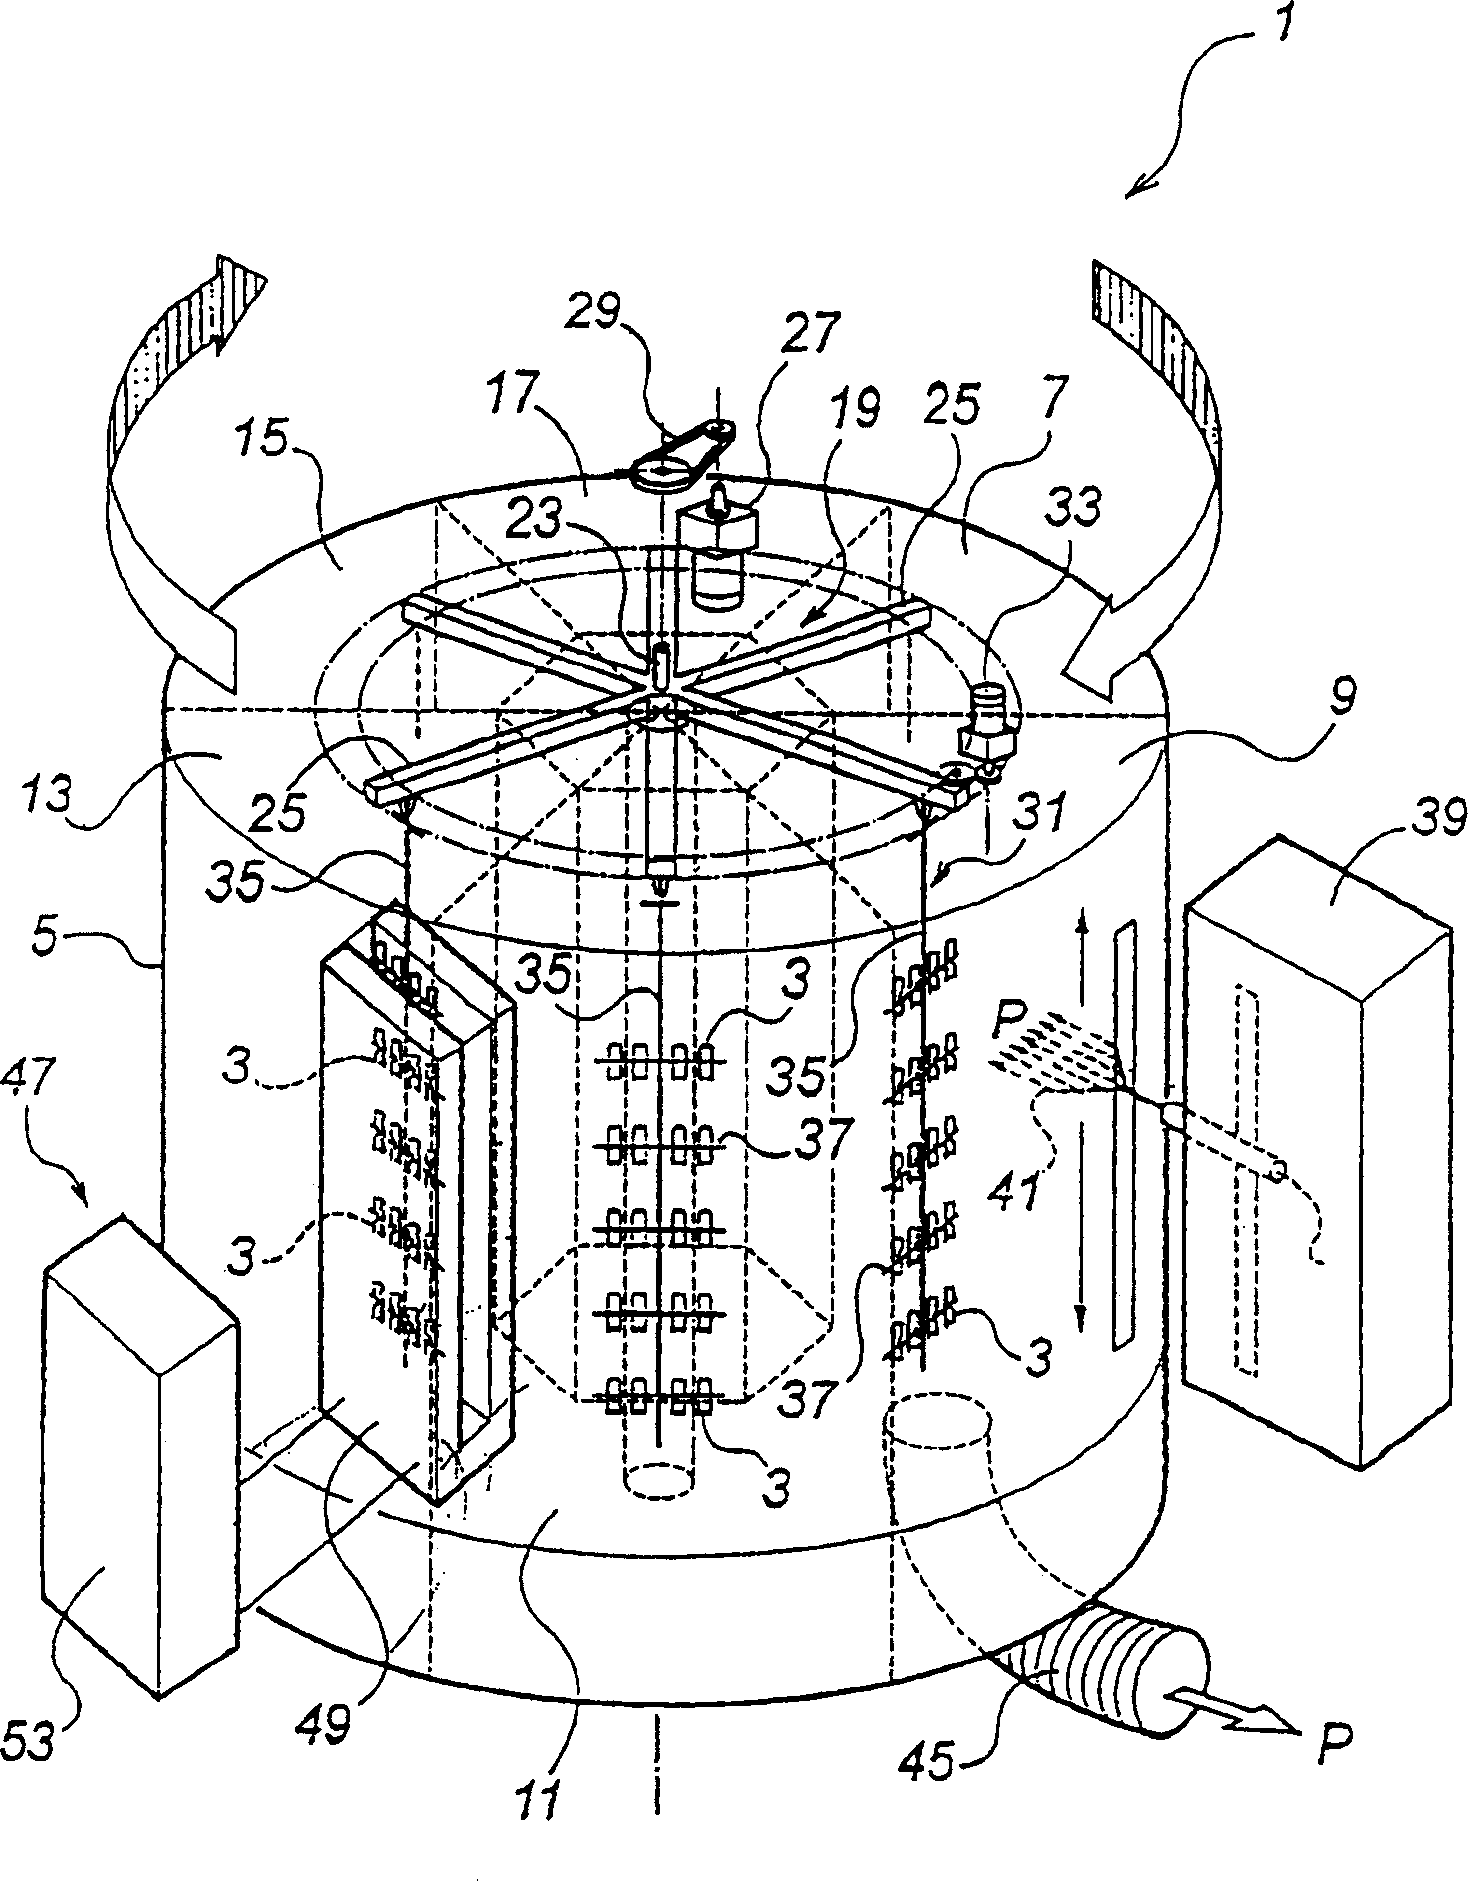 Device and method for coating powder